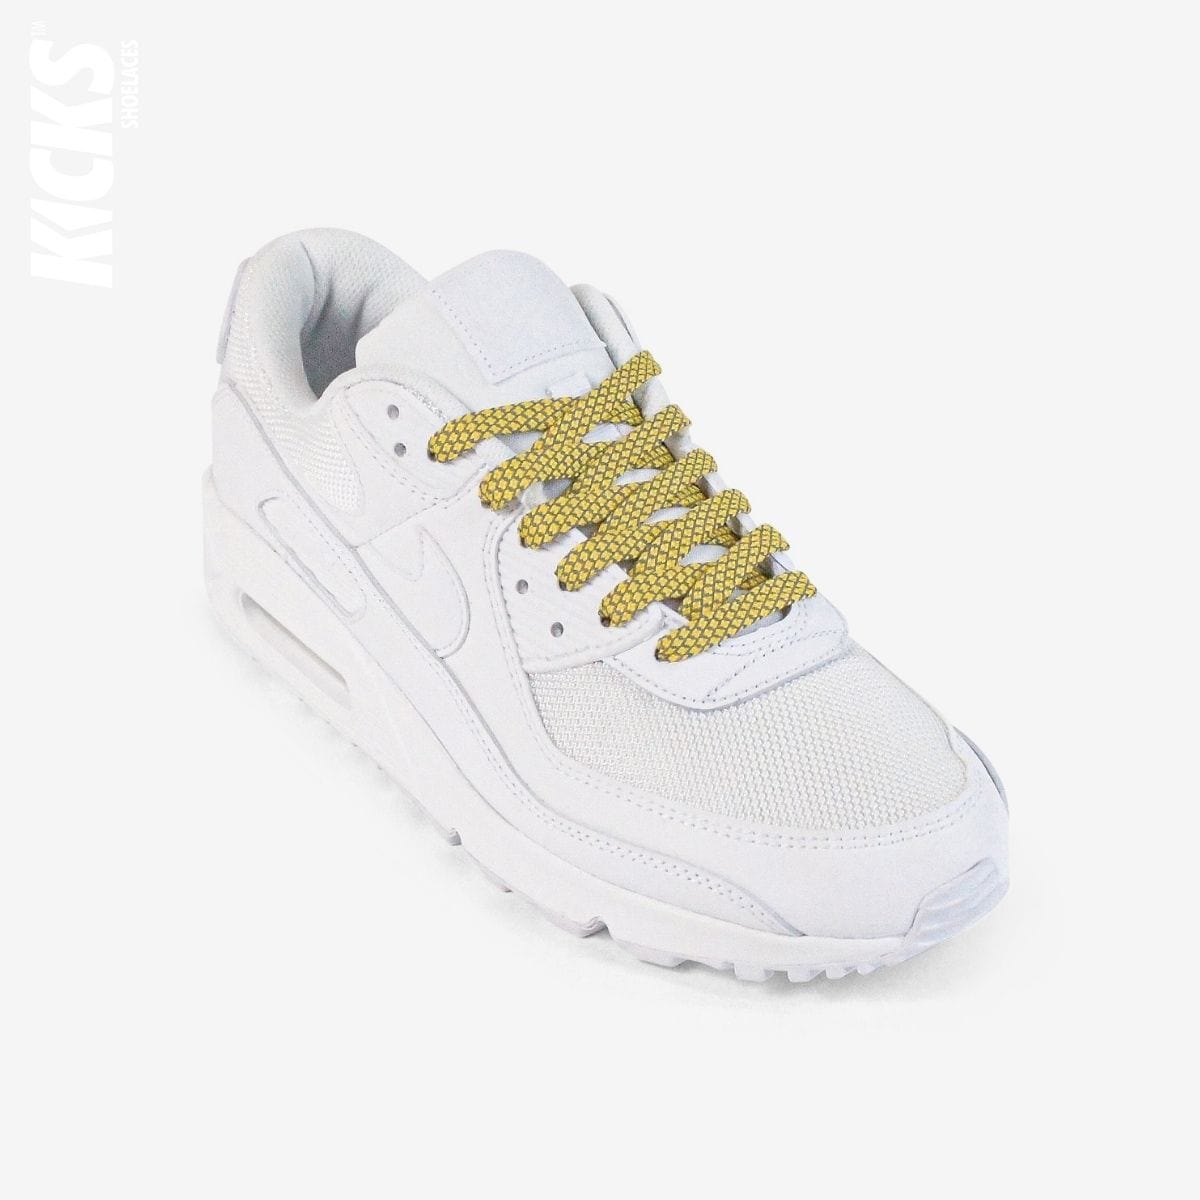 yellow-reflective-colored-shoelaces-on-white-sneakers